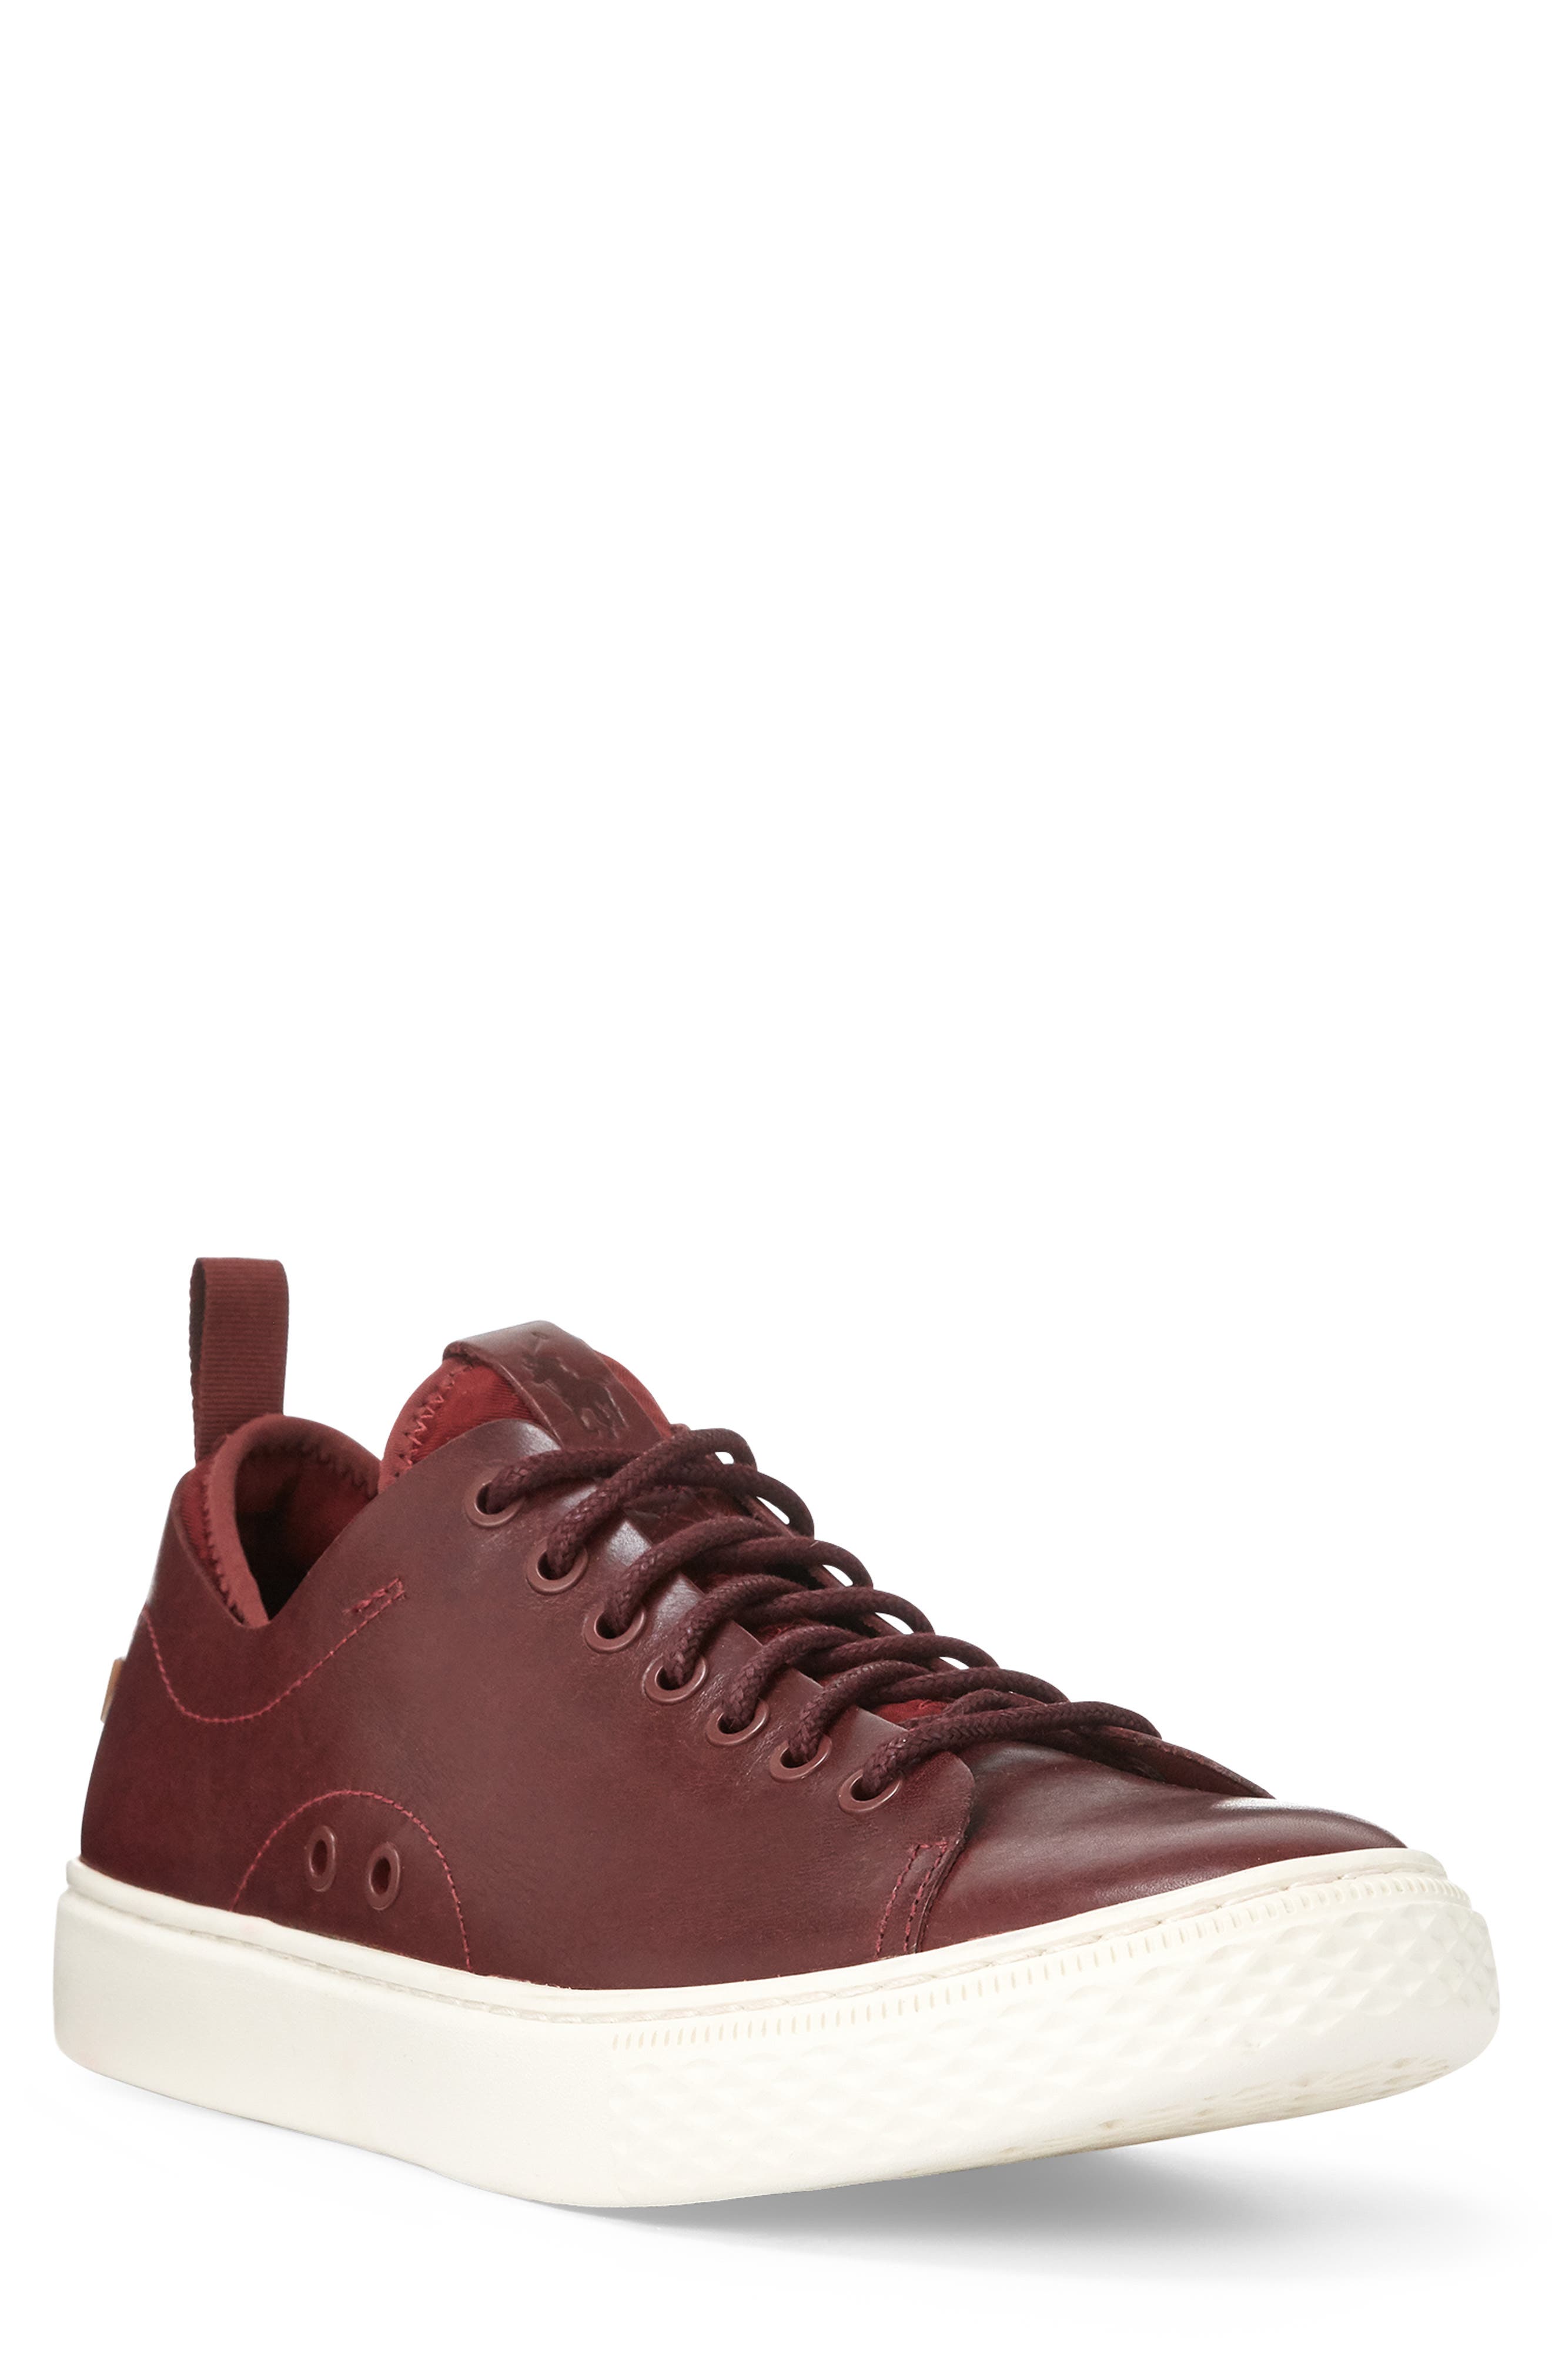 polo ralph lauren leather sneakers